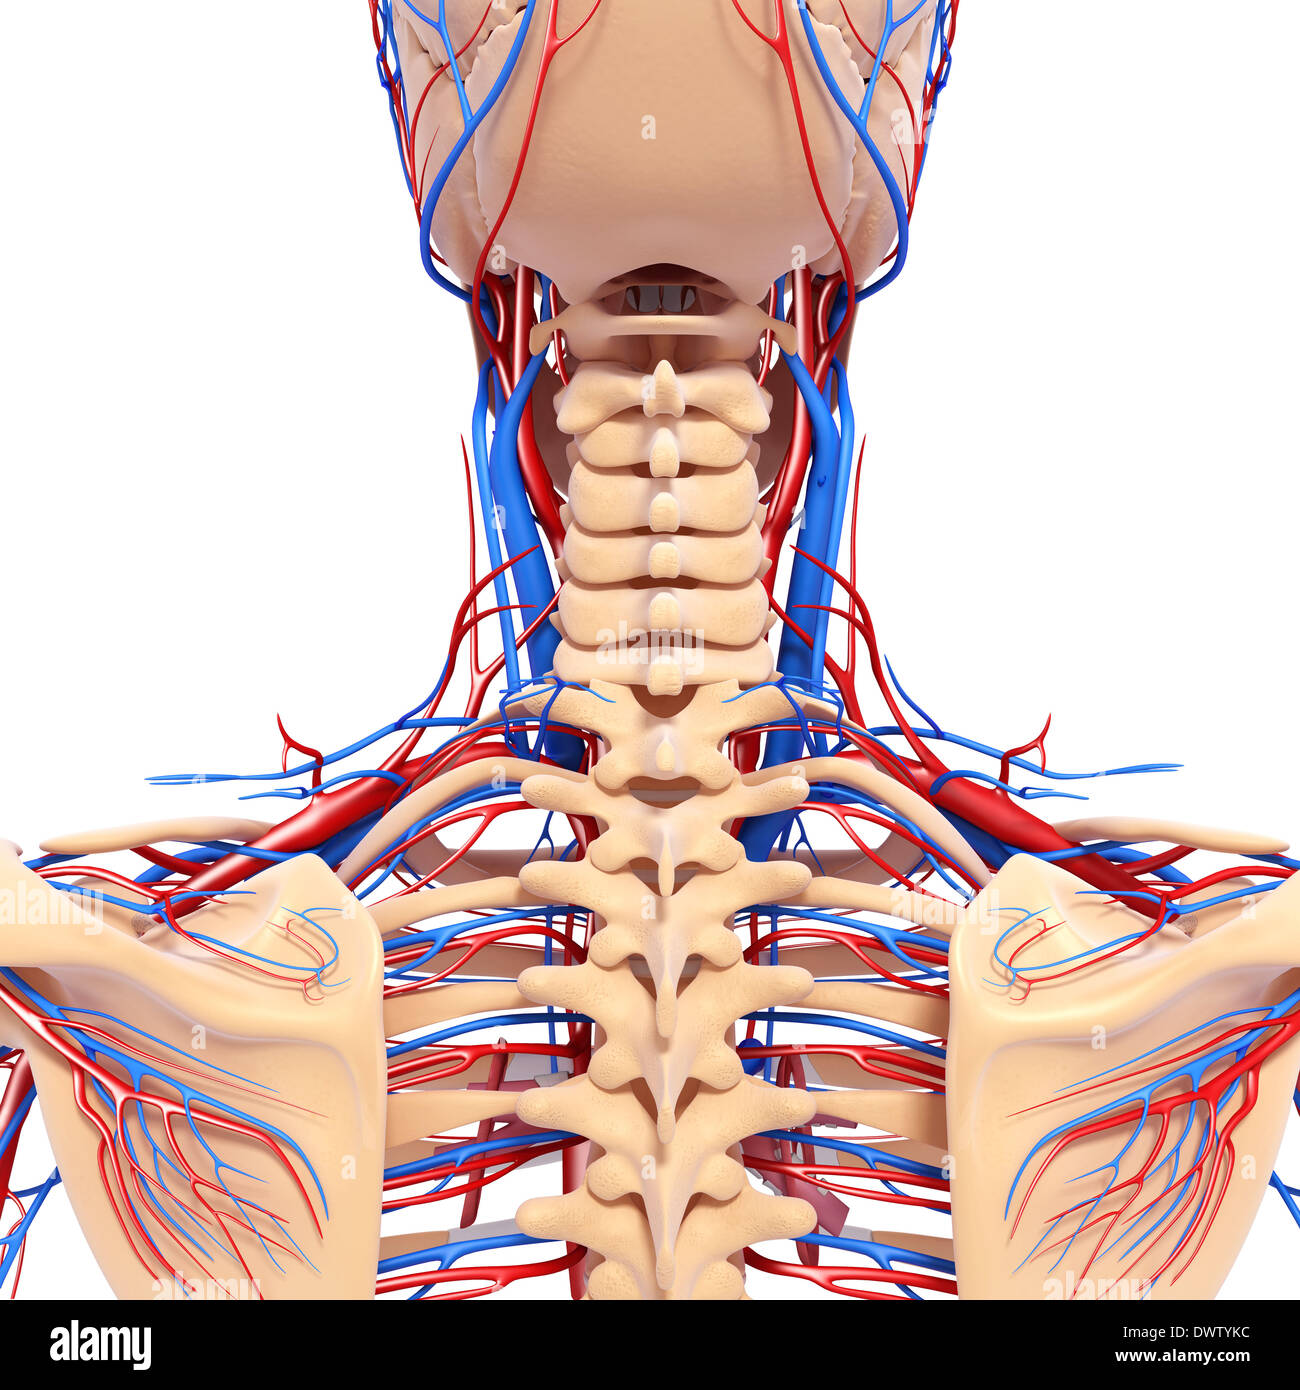 Blood circulation nape of the neck drawing Stock Photo - Alamy